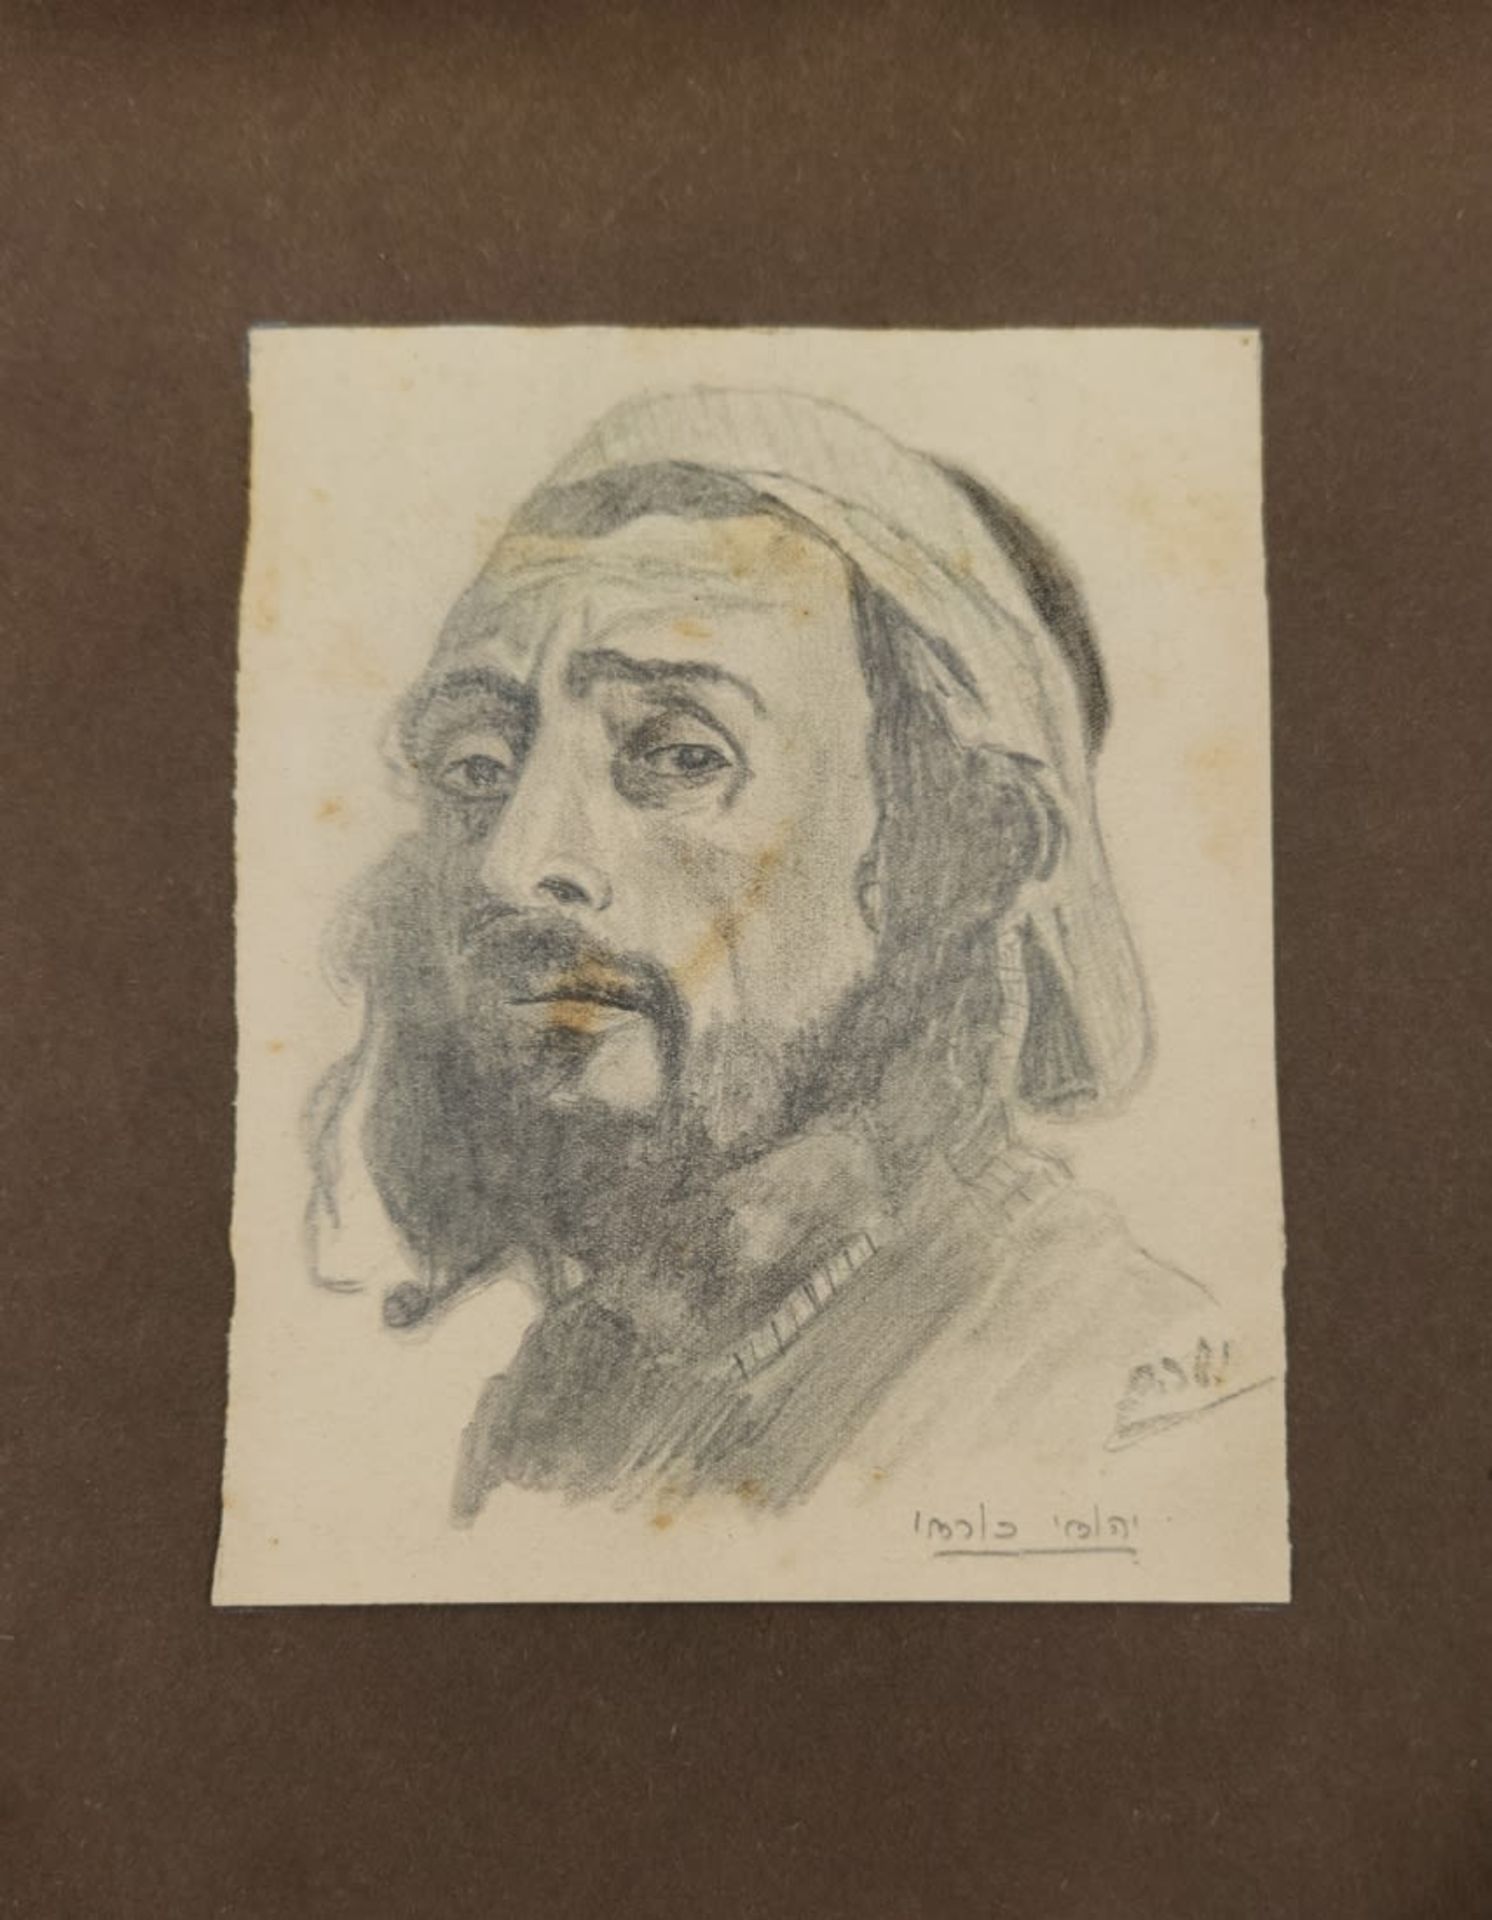 11 drawings of Jewish man, J. Shoham, pencil on paper, some stains, signed: J. Shoham pasted in an - Image 7 of 12